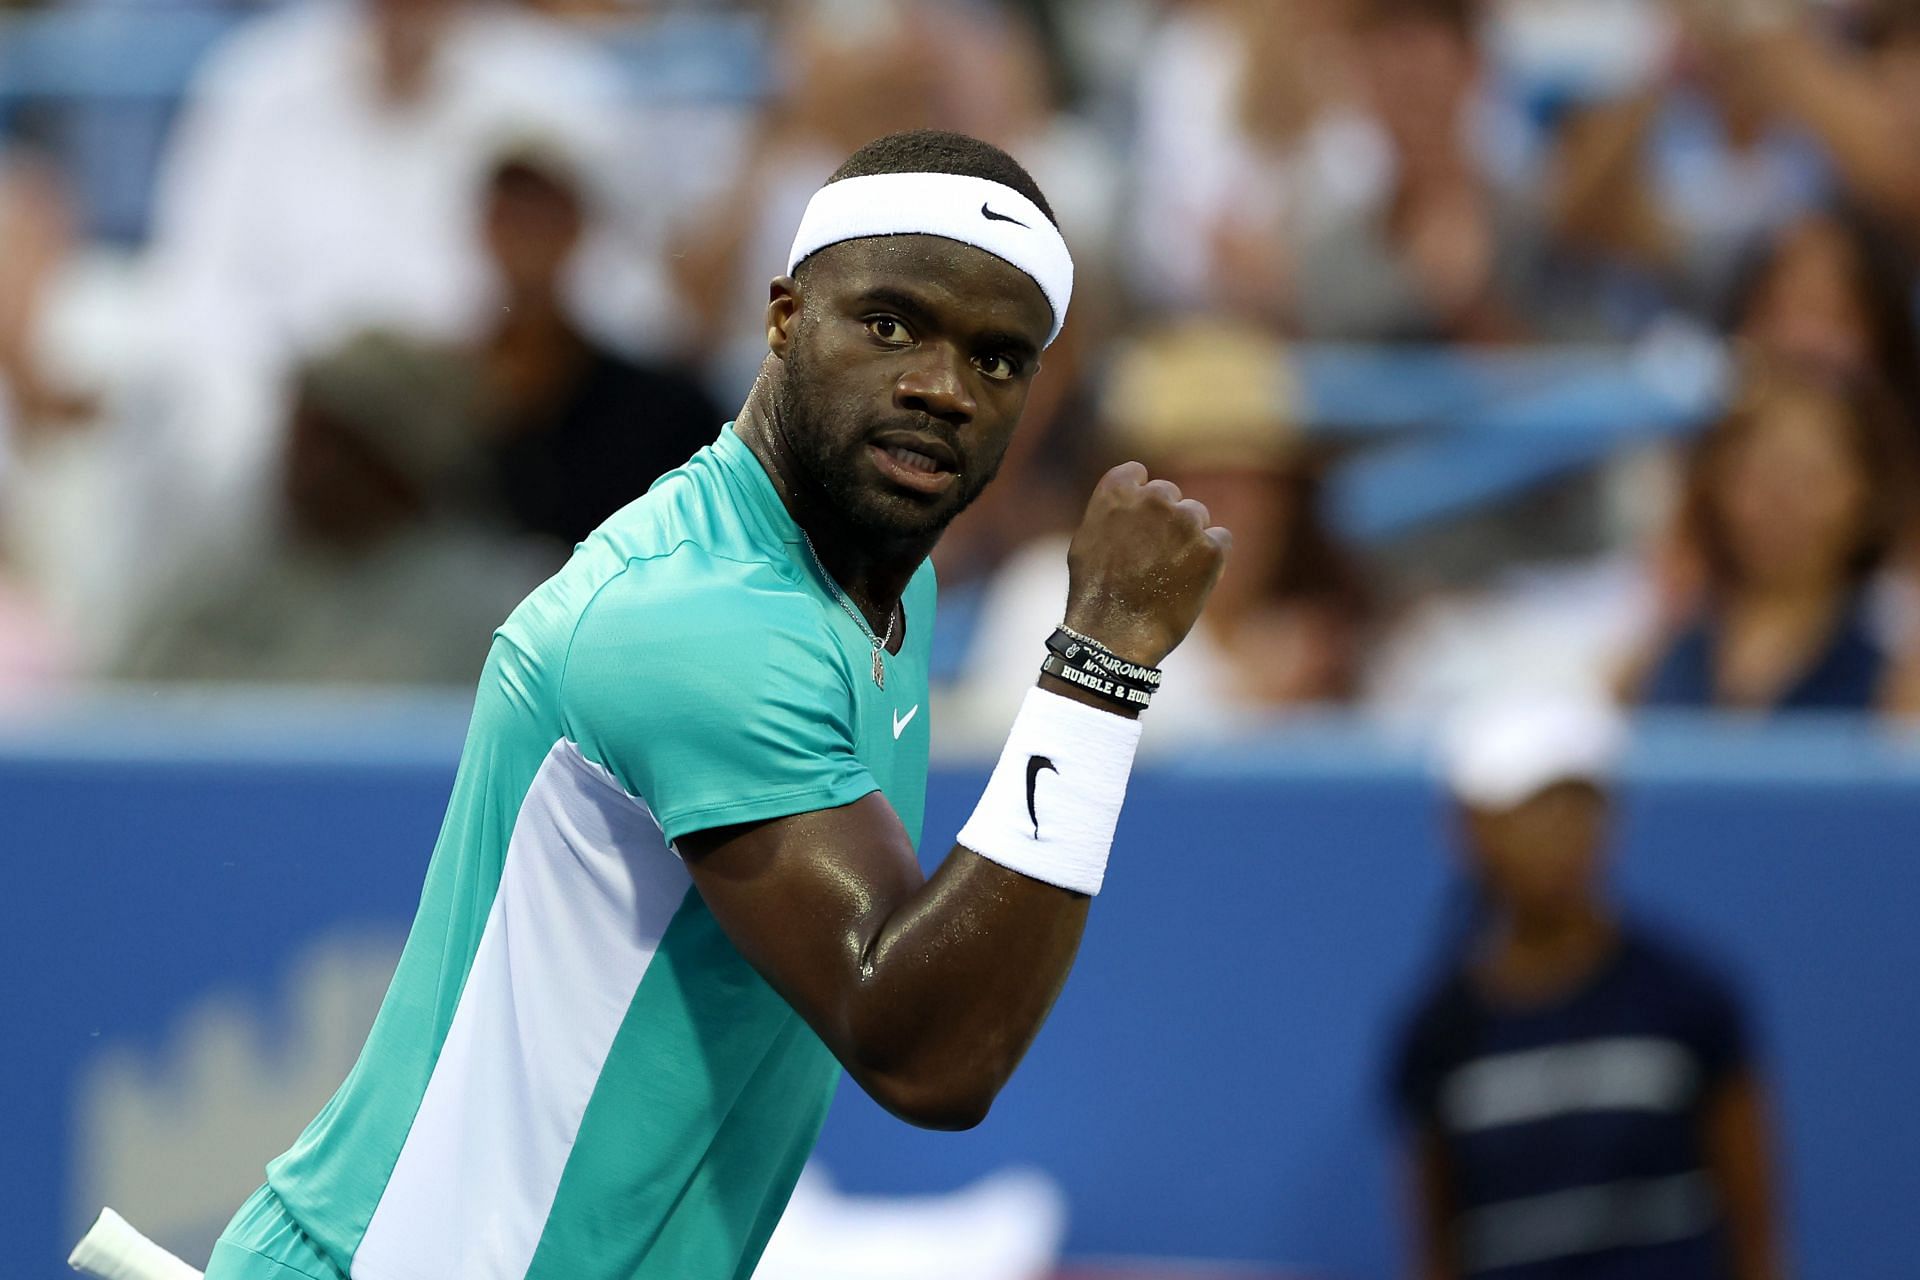 Frances Tiafoe receives a customized Cherry Blossom D.C. United football  jersey after 2R win at Citi Open 2023